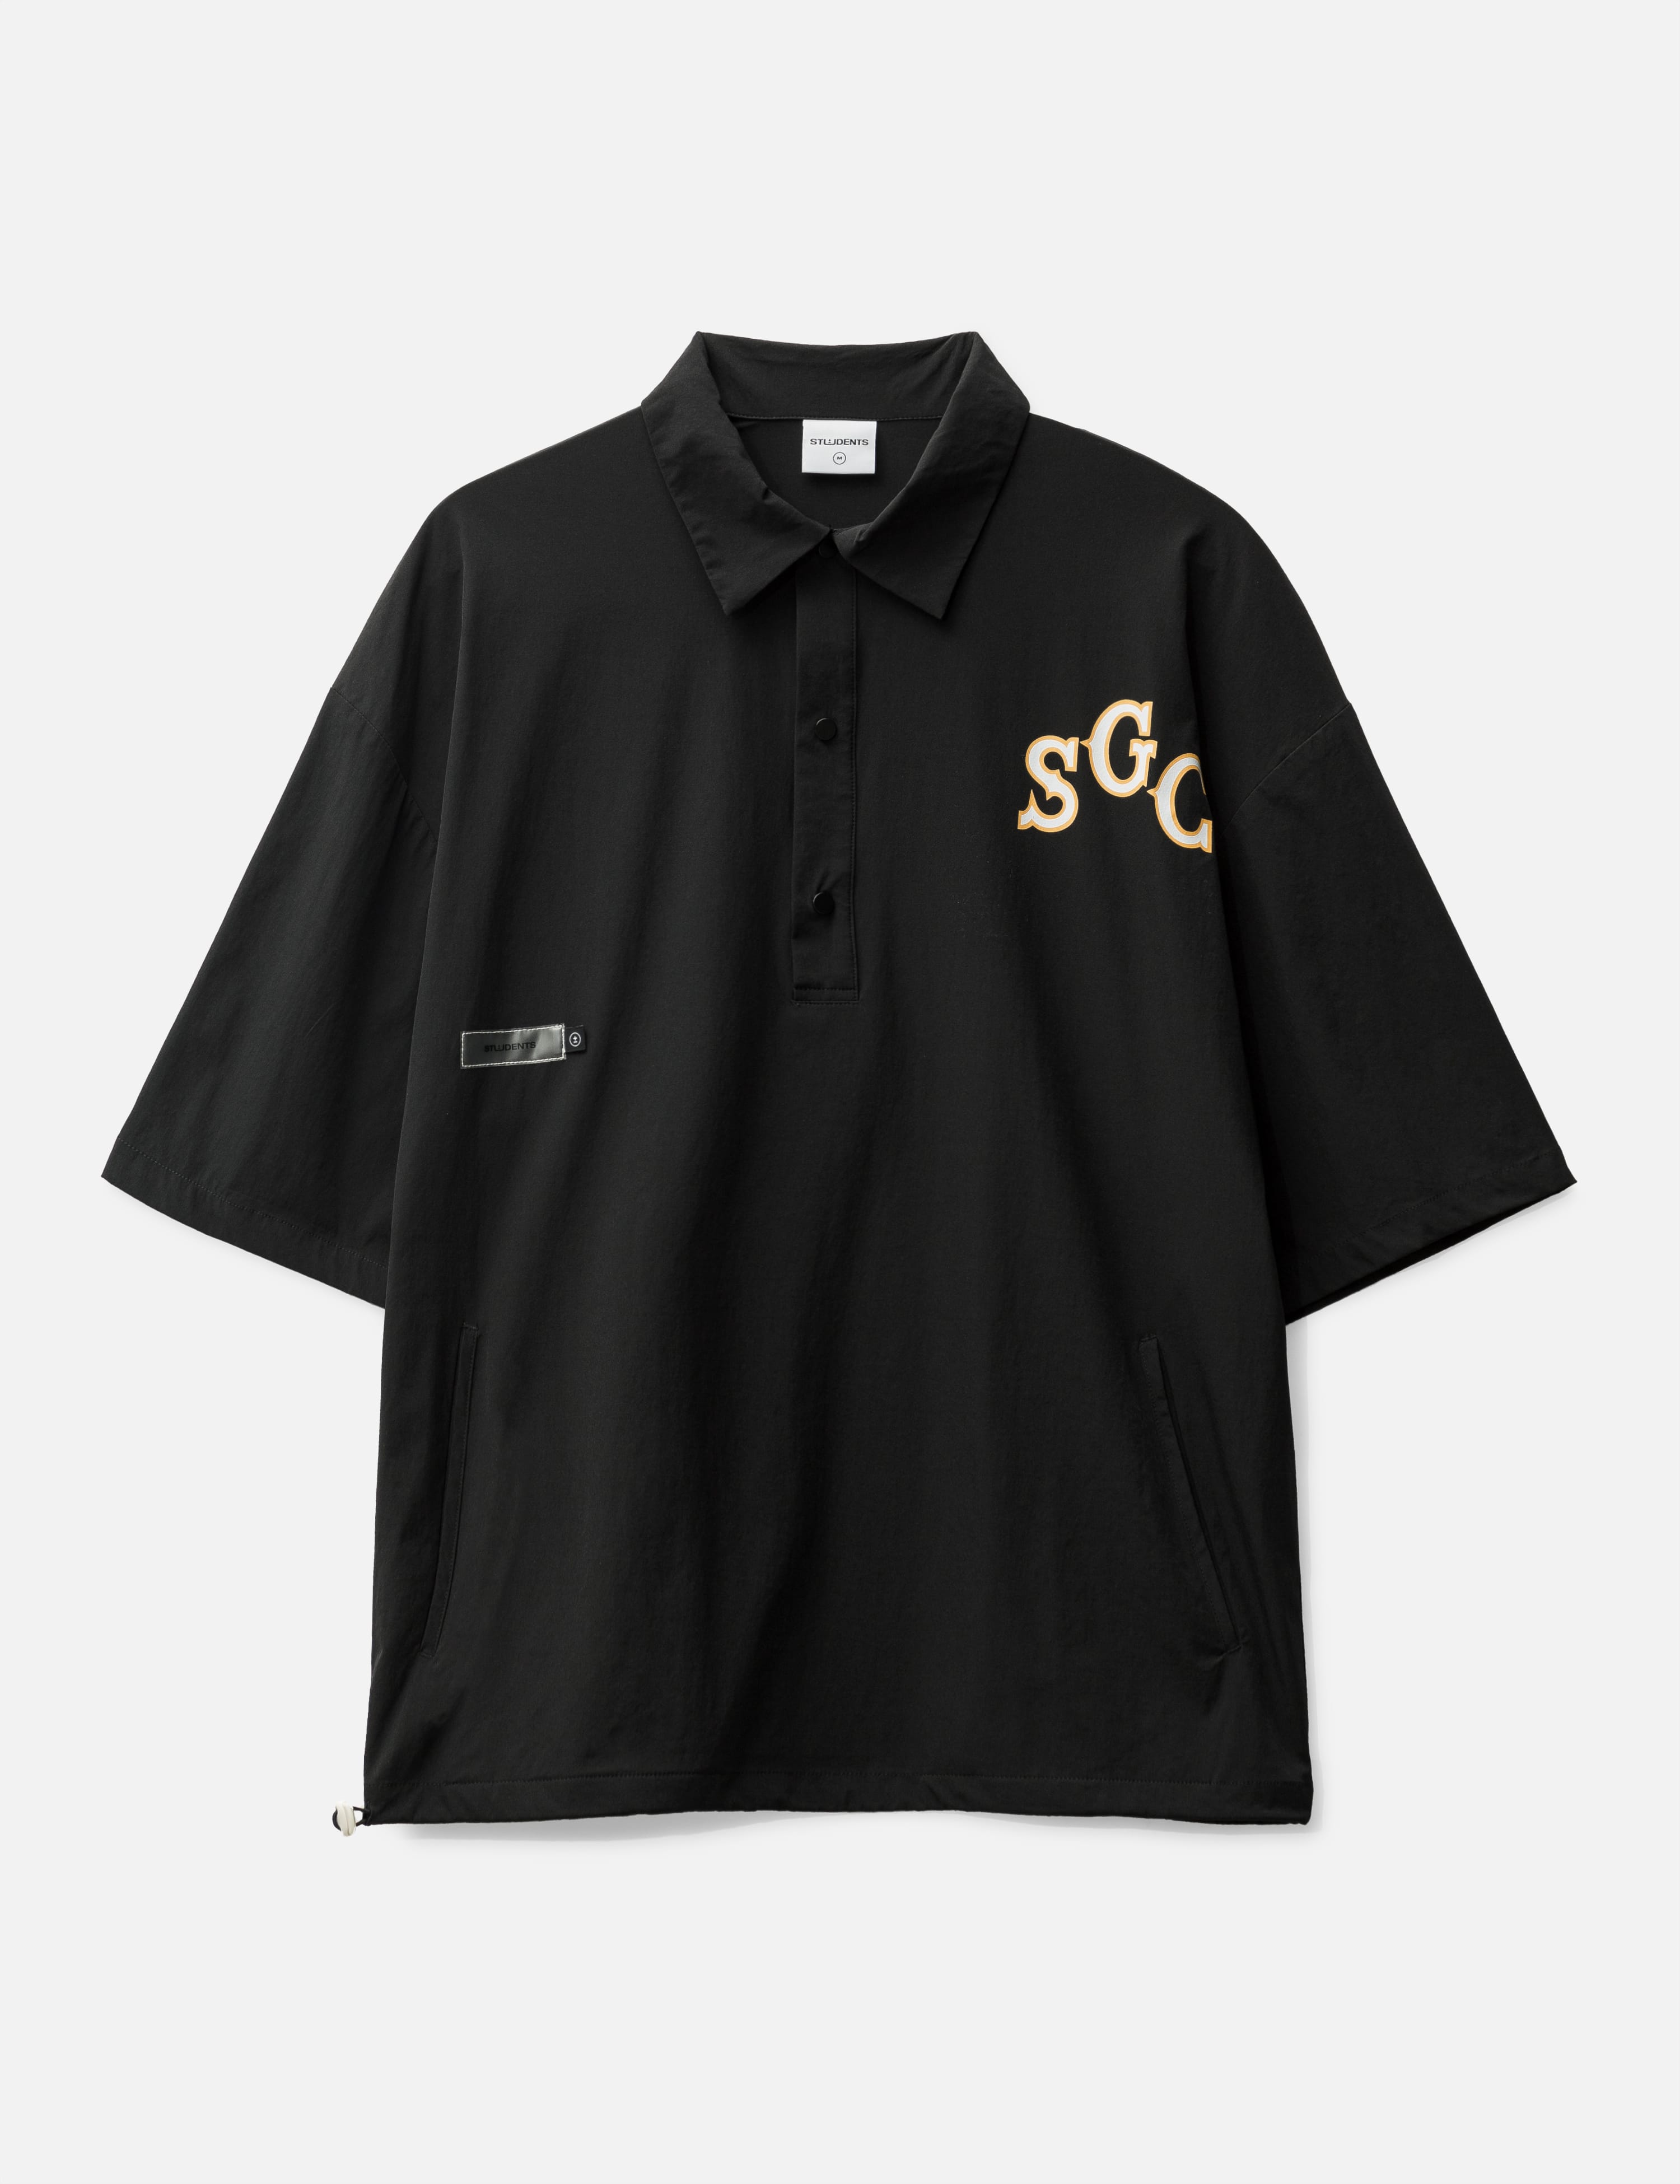 Stüssy - Mask L/S Polo | HBX - Globally Curated Fashion and